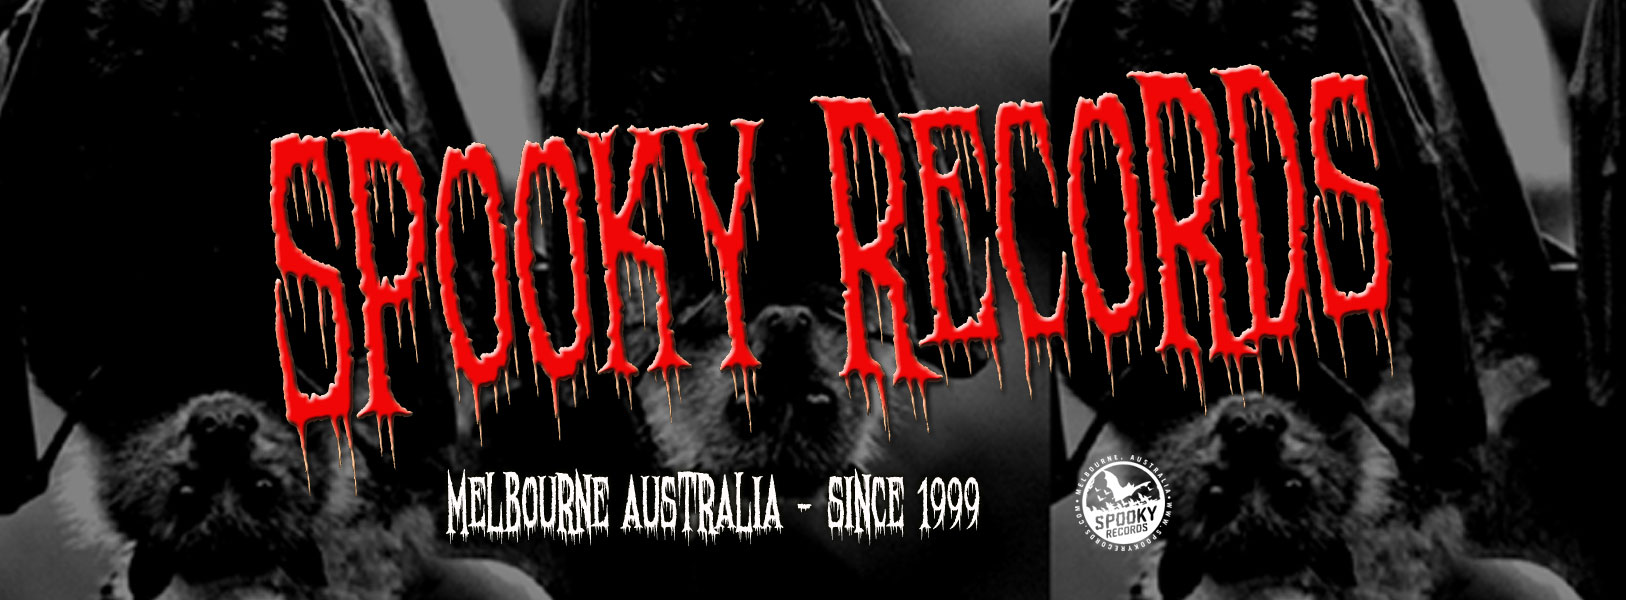 Spooky Records banner